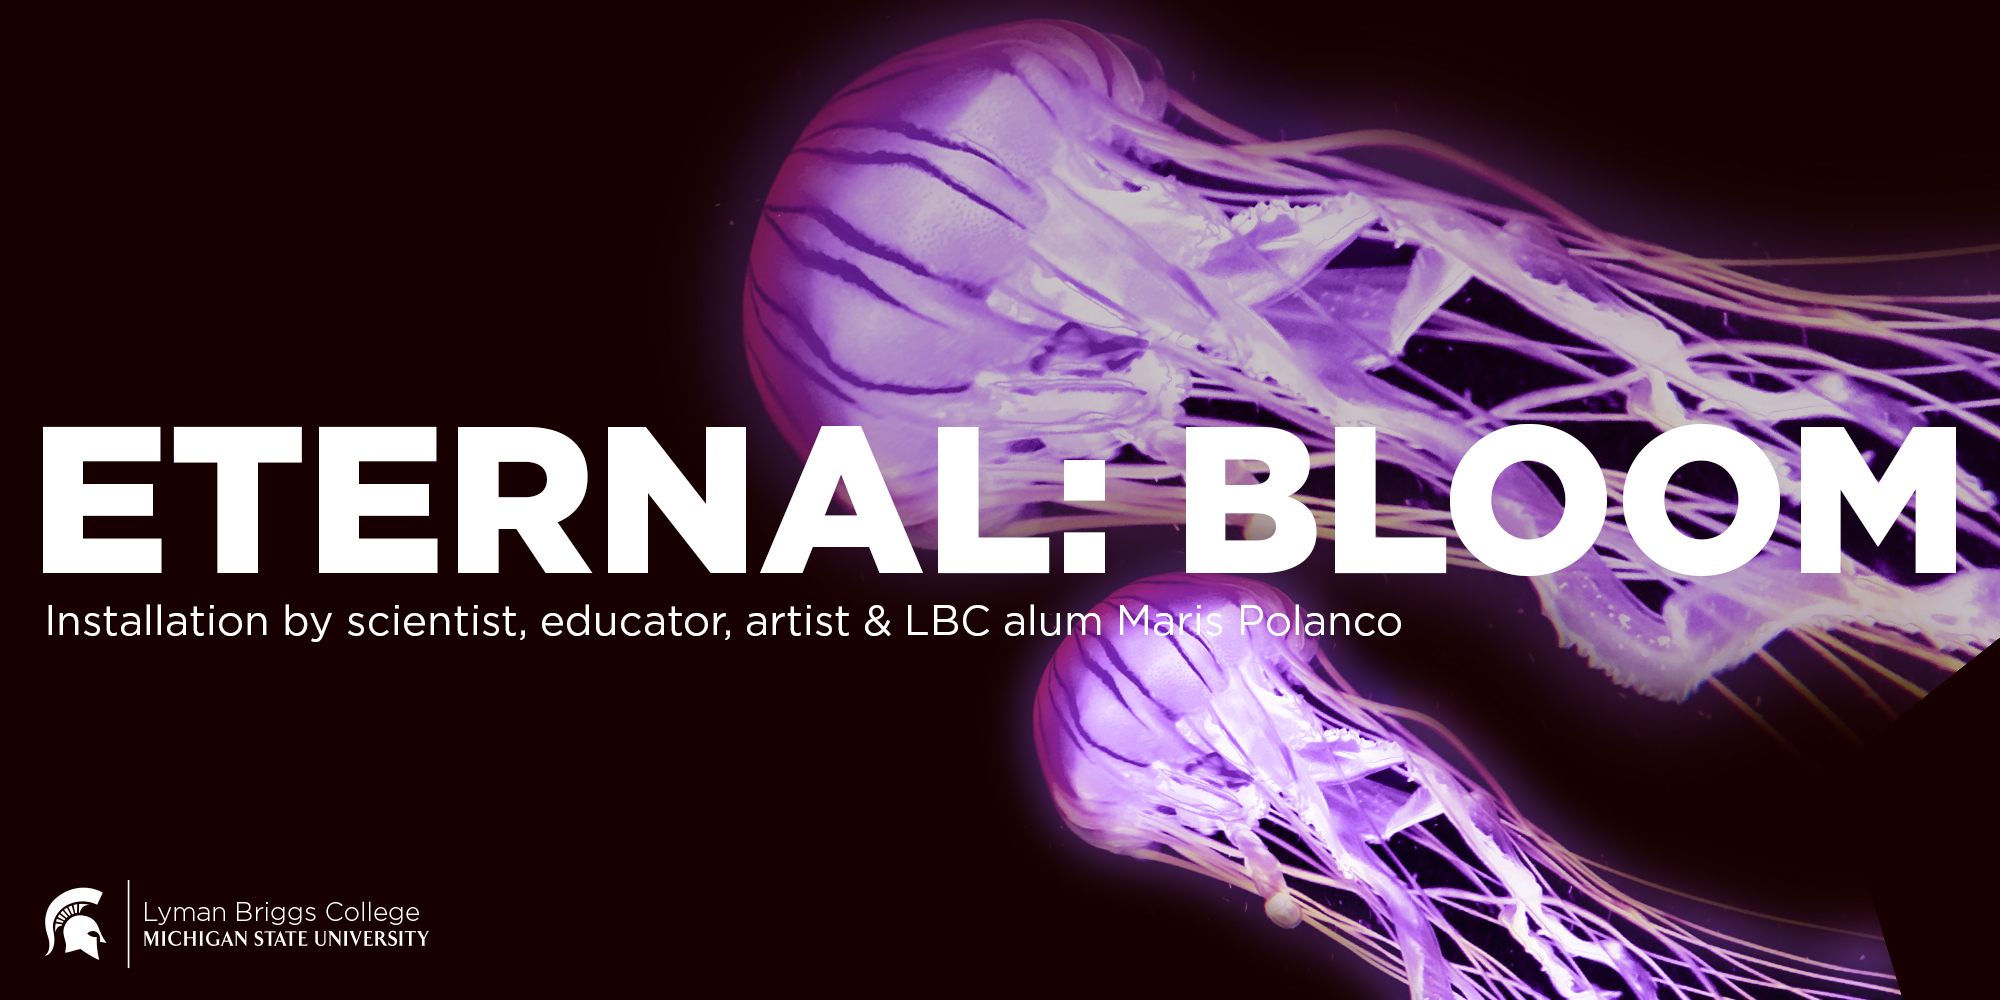 ETERNAL: BLOOM image. Two glowing purple jellyfish in the background 